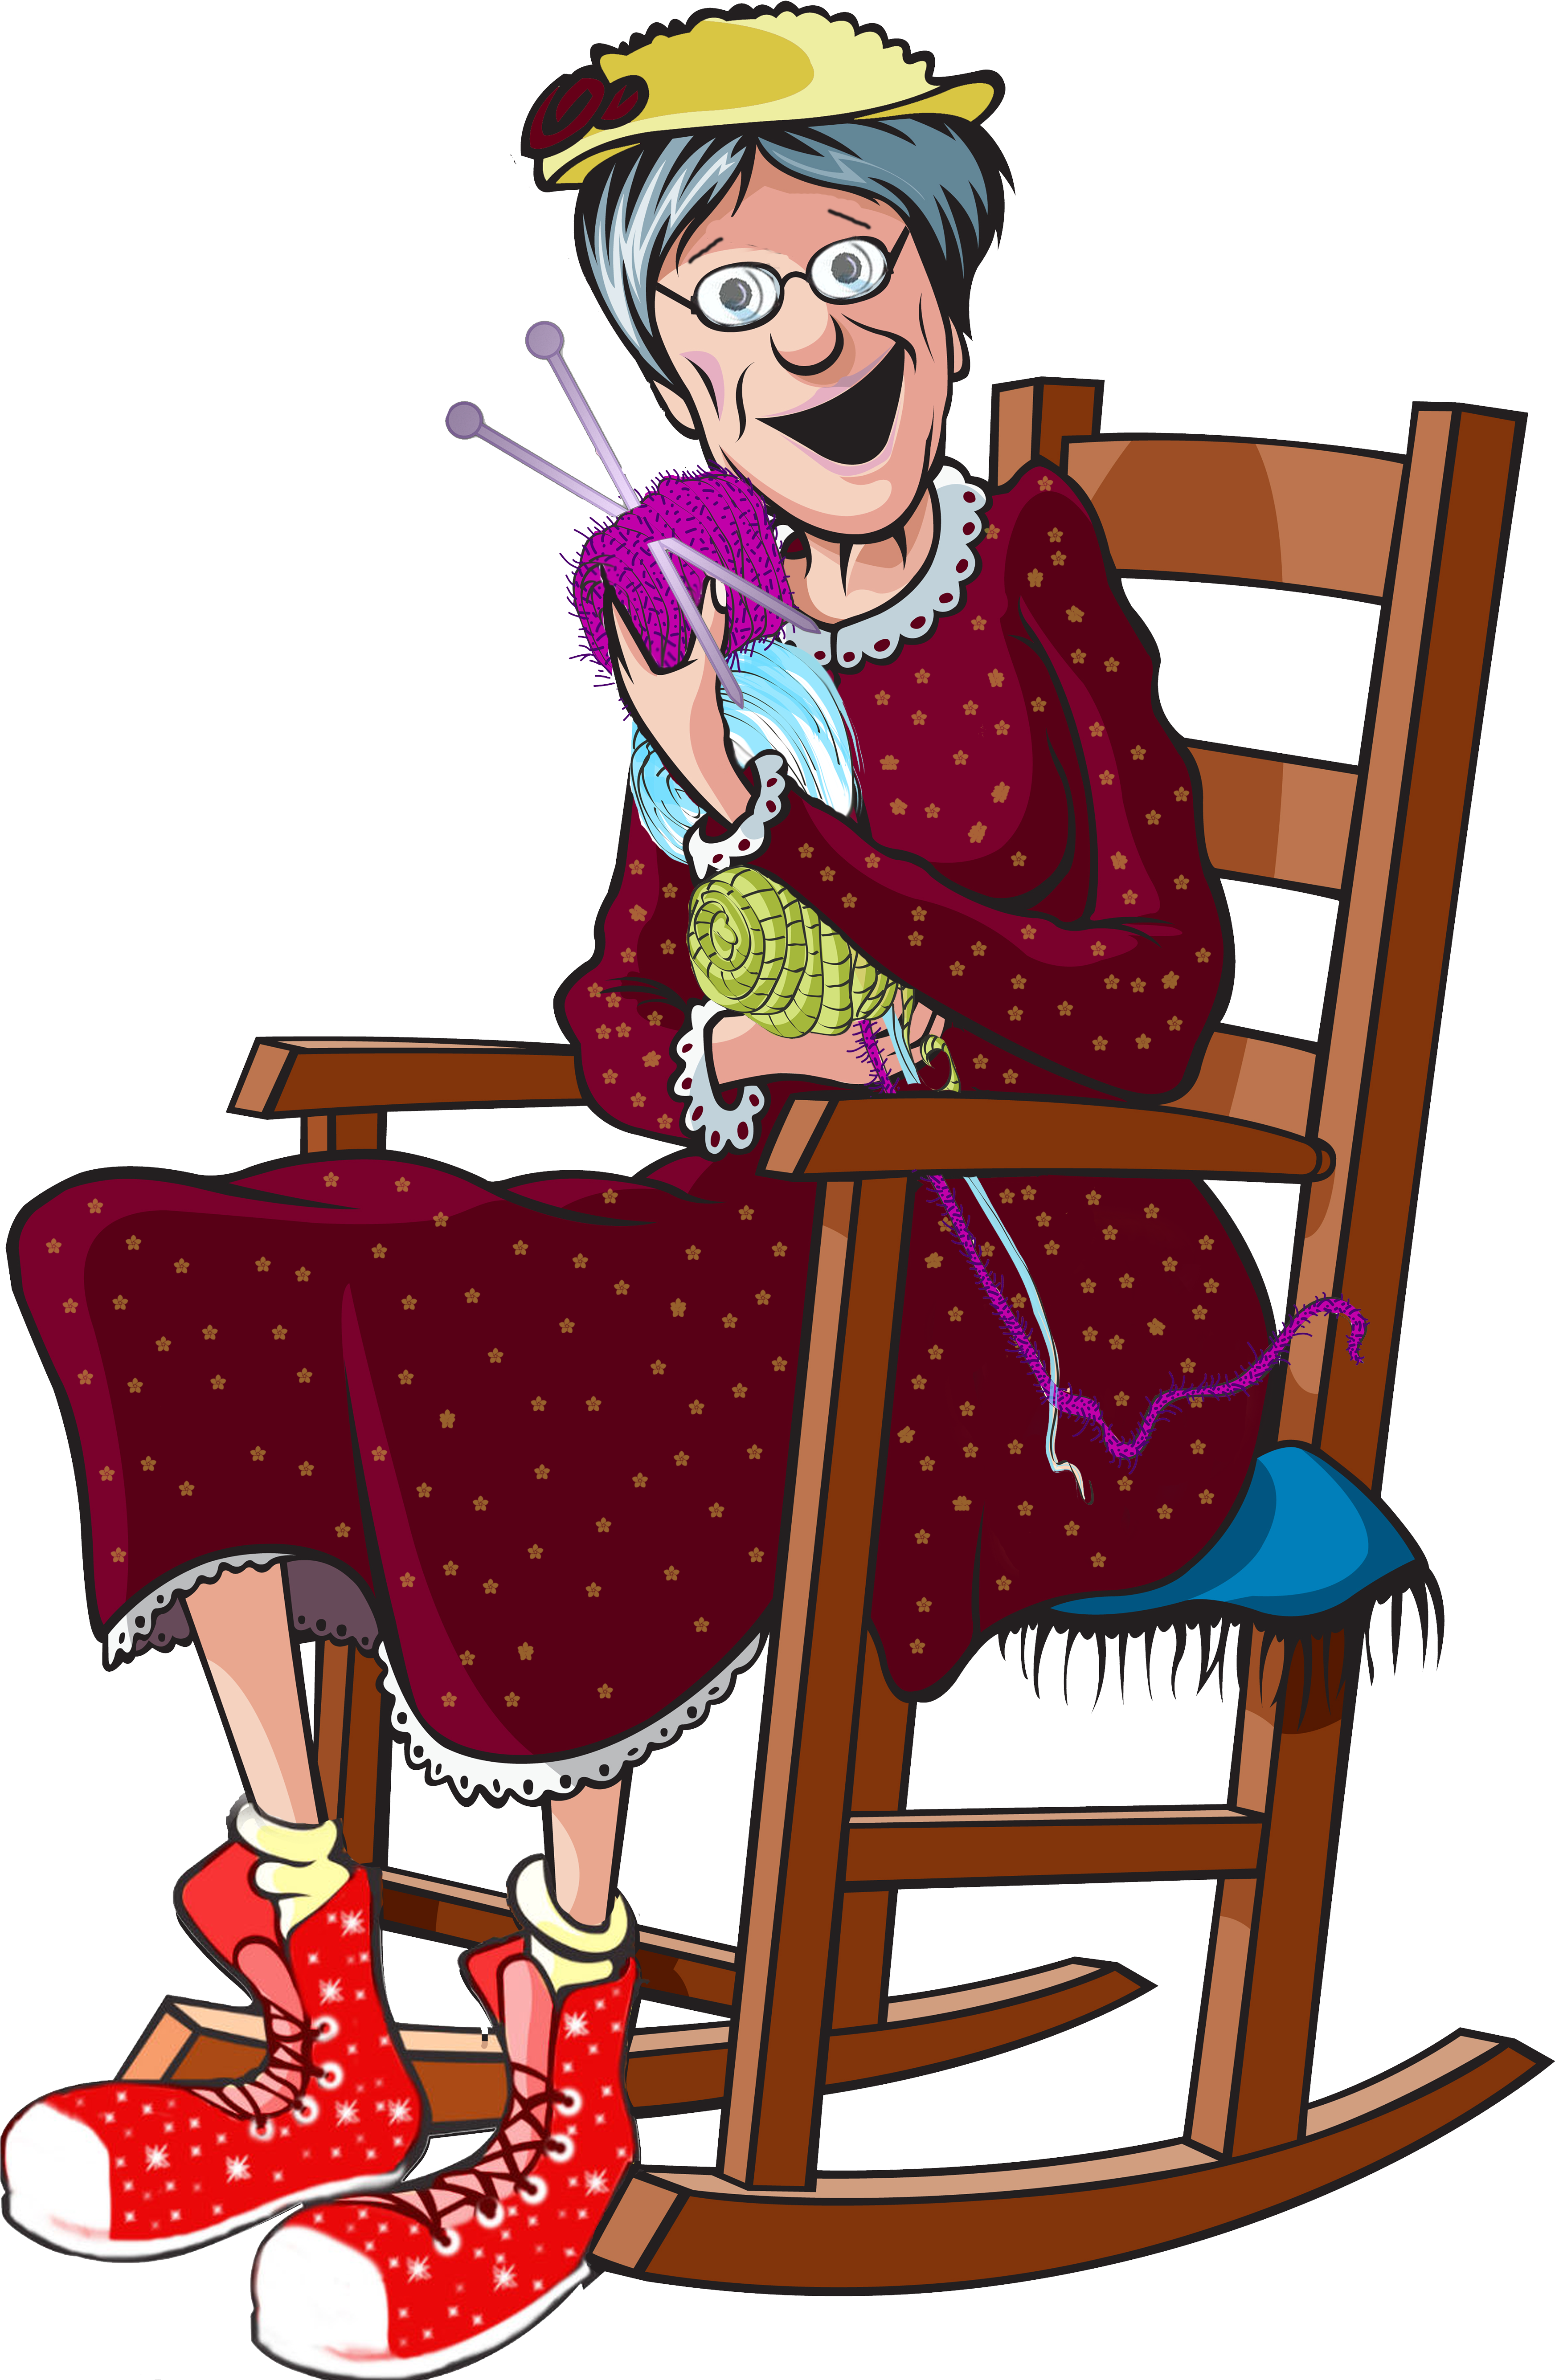 A Cartoon Of A Woman In A Rocking Chair